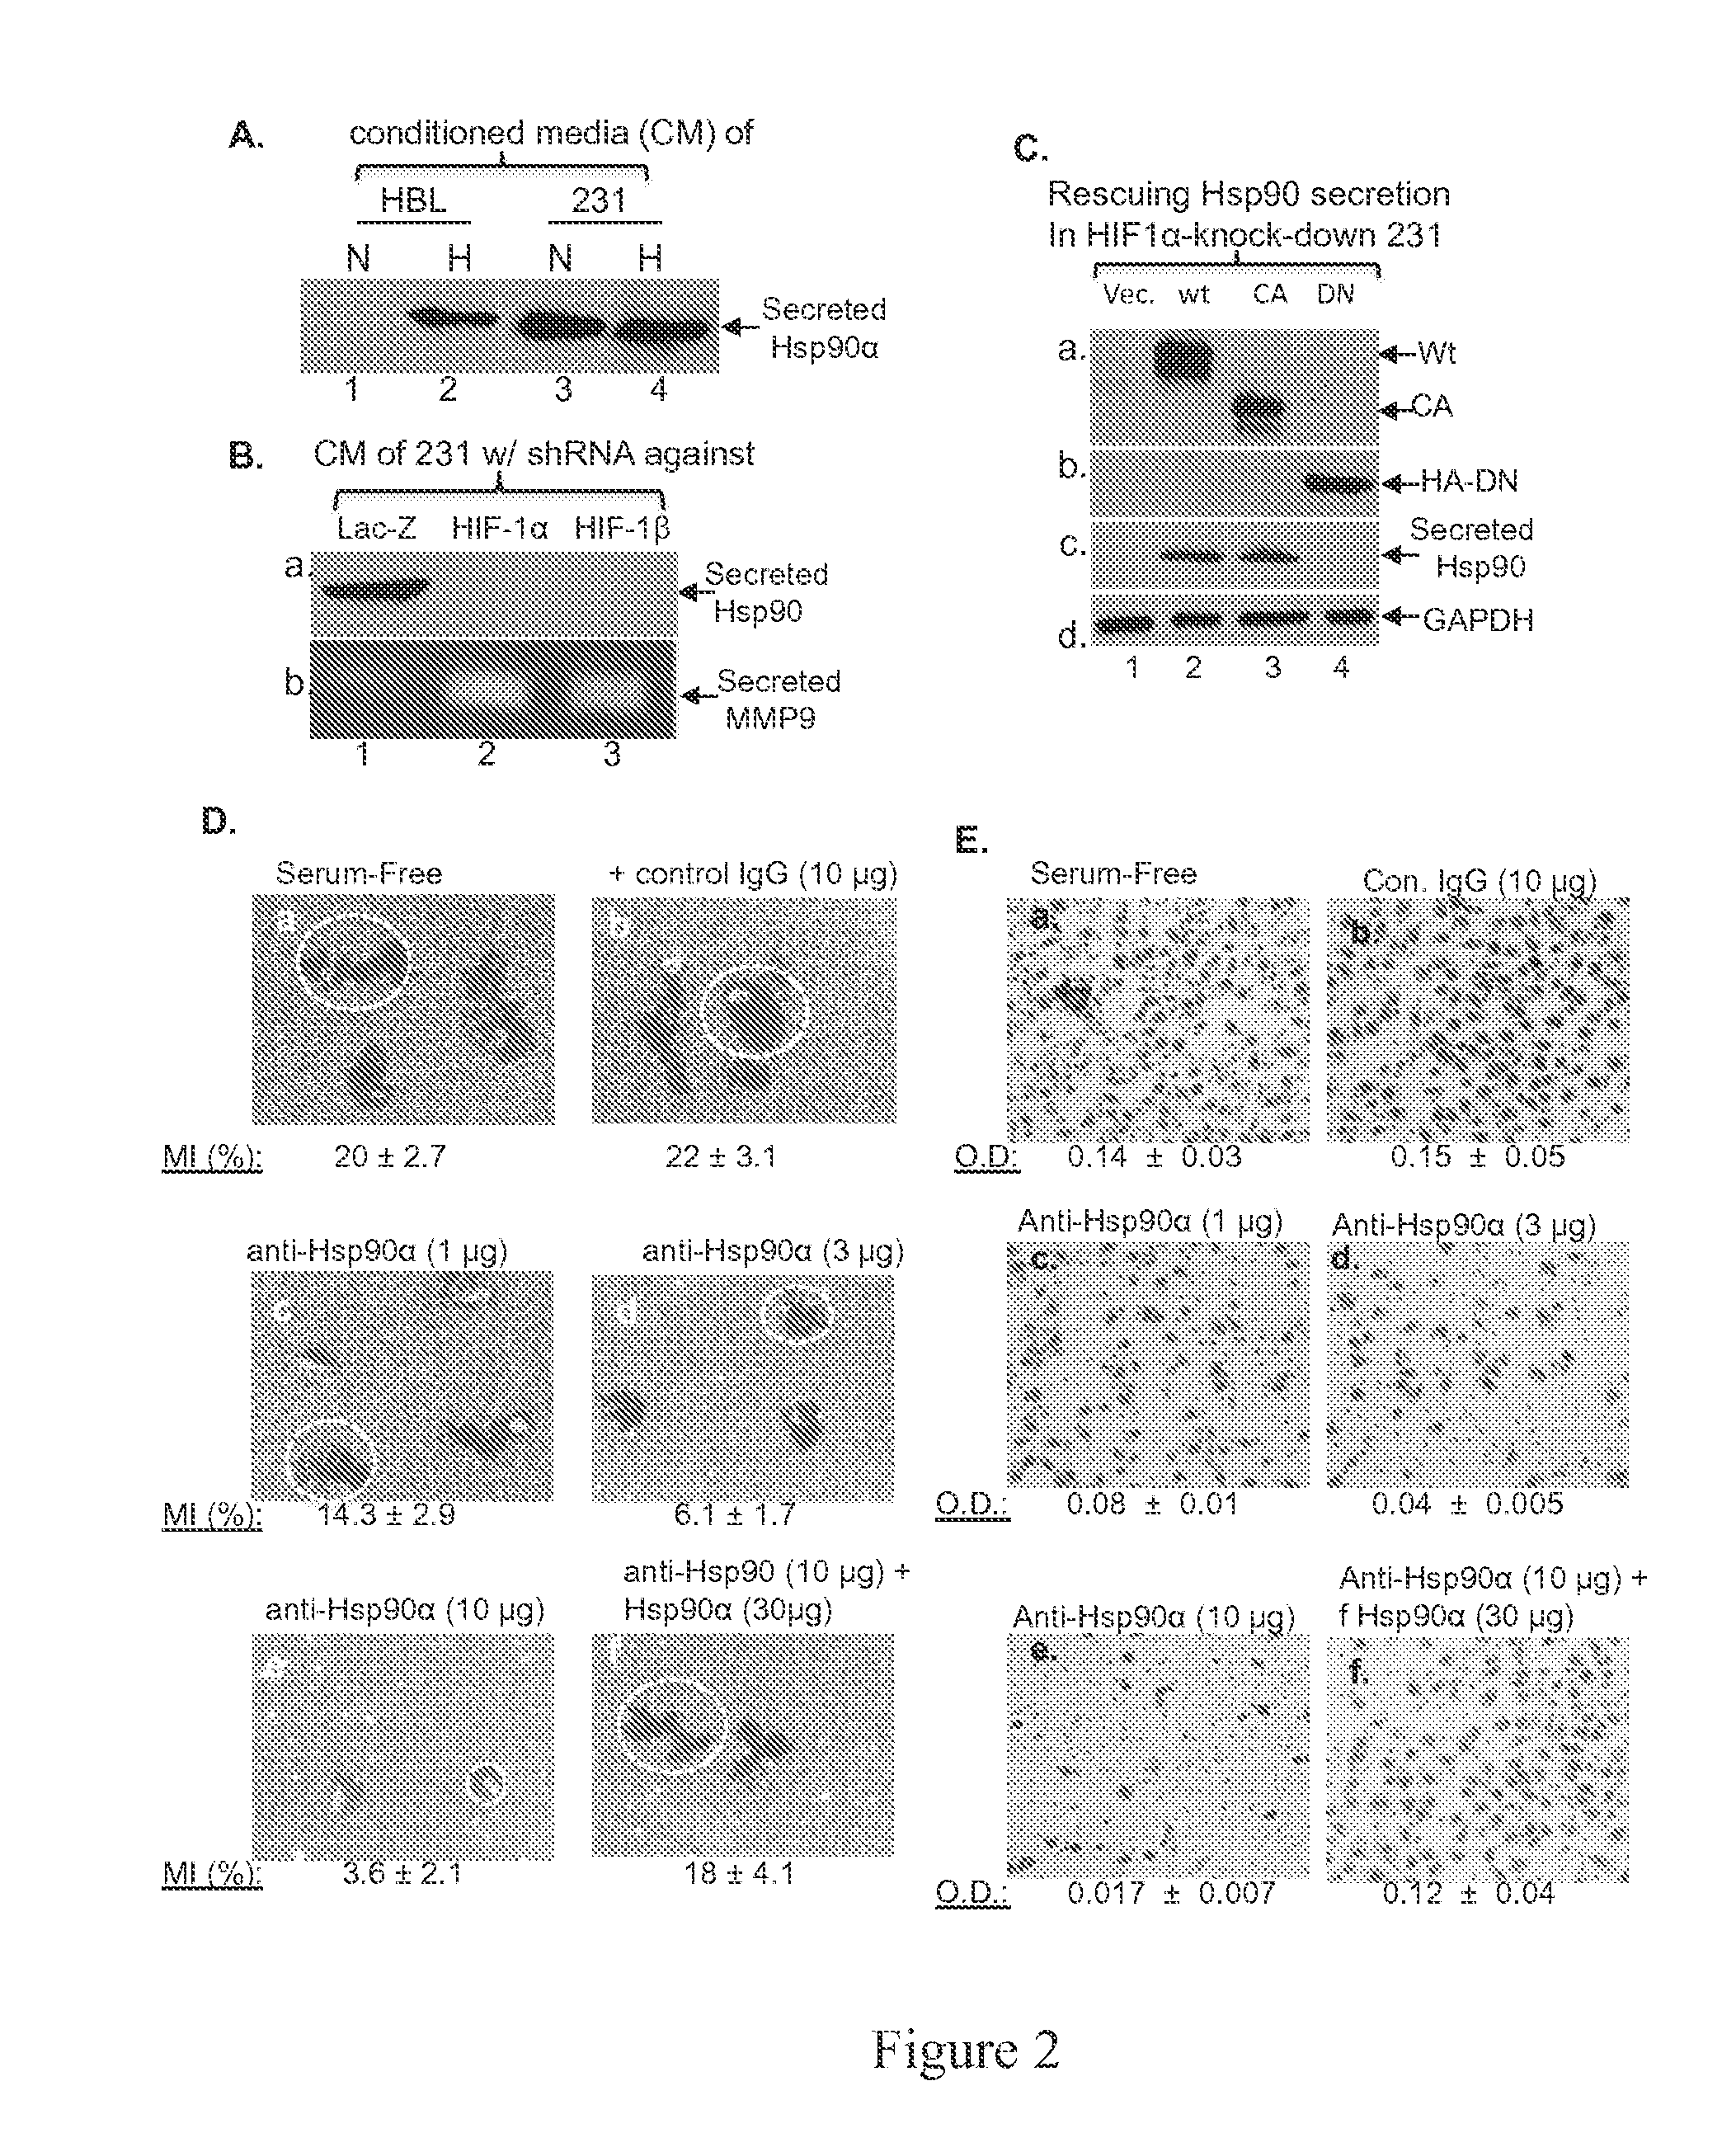 Fragment of secreted heat shock protein-90alpha (hsp90alpha) as vaccines or epitope for monoclonal antibody drugs or target for small molecule drugs against a range of solid human tumors